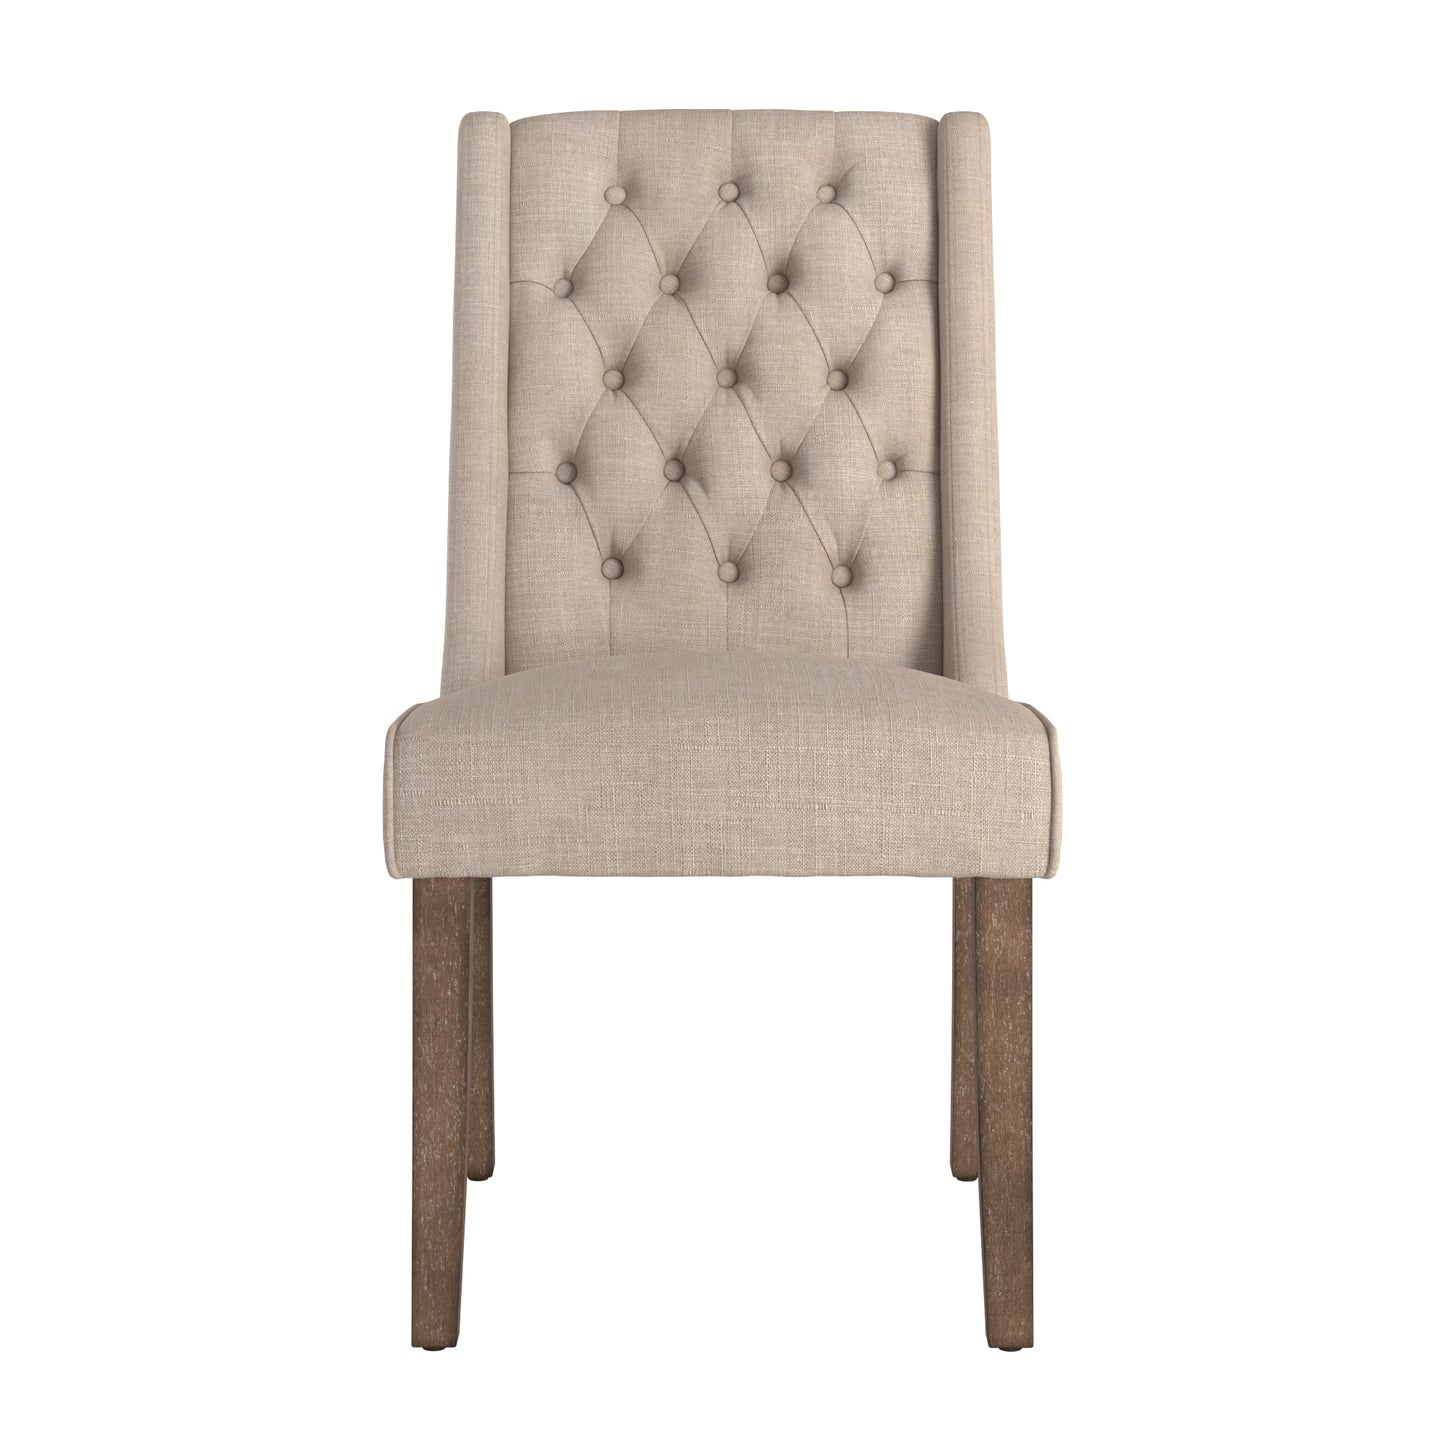 Tufted Wingback Hostess Chairs (Set of 2) - Beige Linen